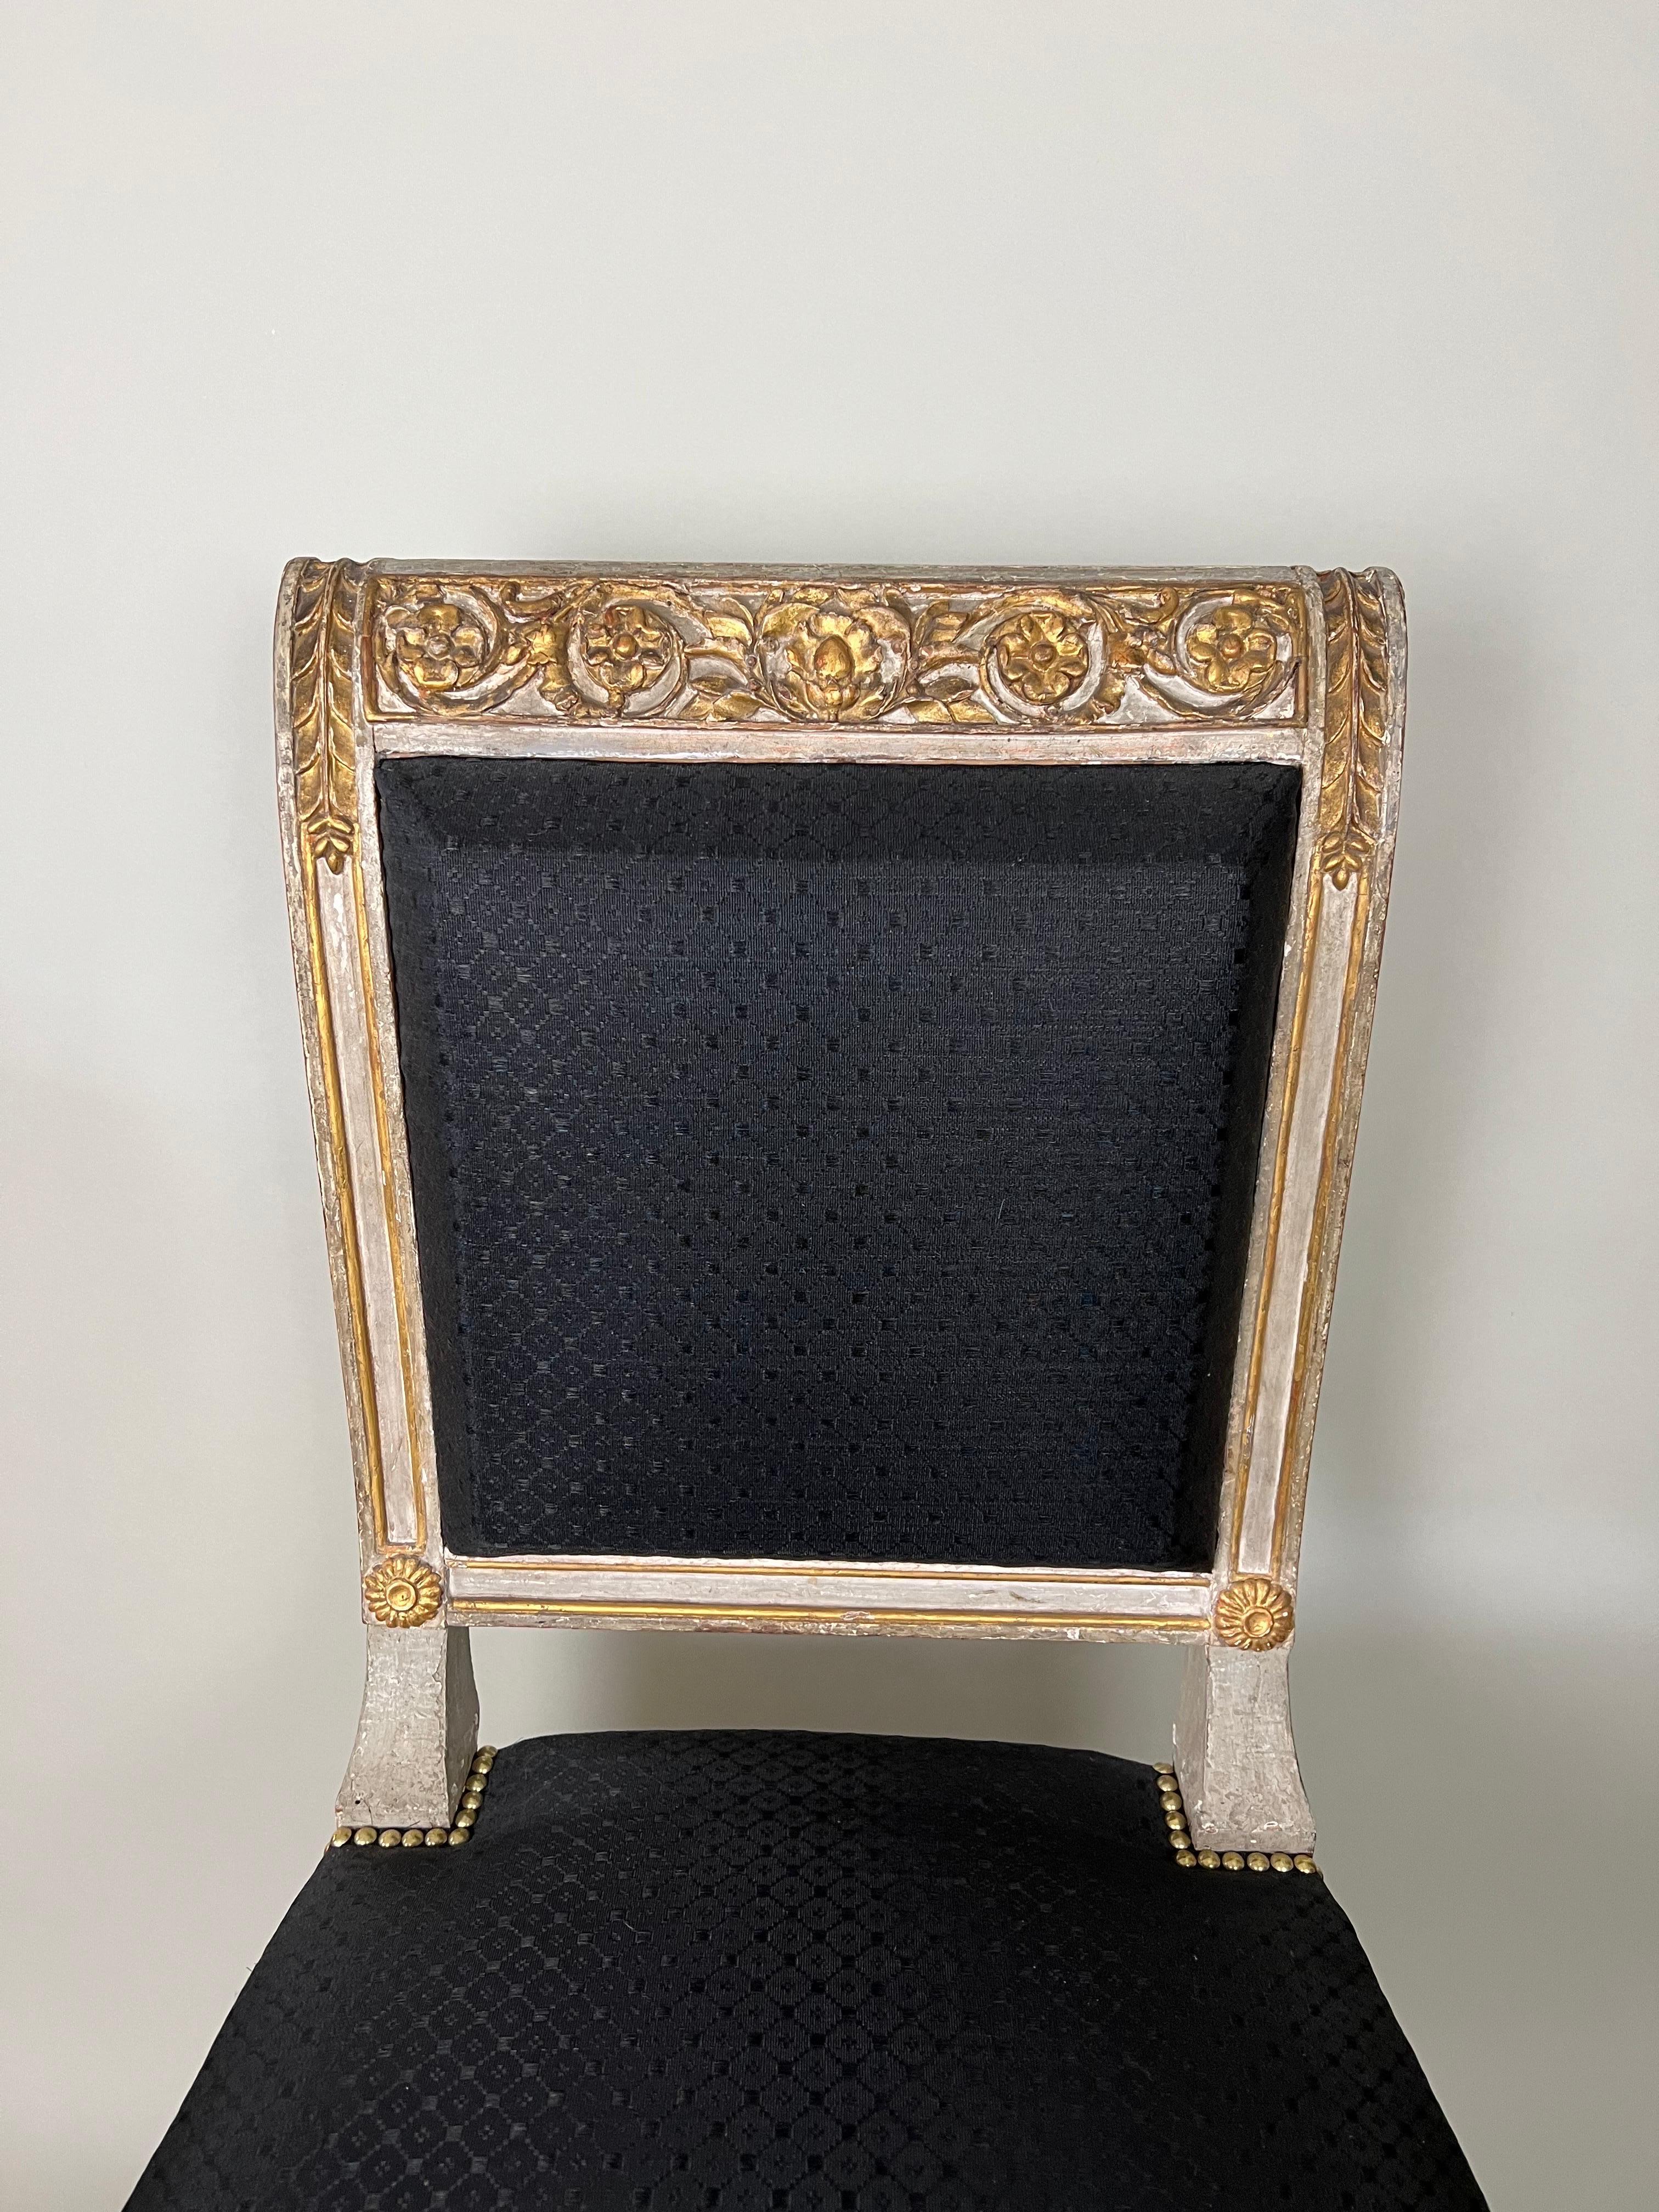 The pair of side chairs come from the Palazzo Tursi, Genoa. Residence of King Vittorio Emanuele and Queen Maria Teresa. Probably designed by Carlo Randoni (1755-1831). They are upholstered in Black Horsehair. This is from a very large suite of